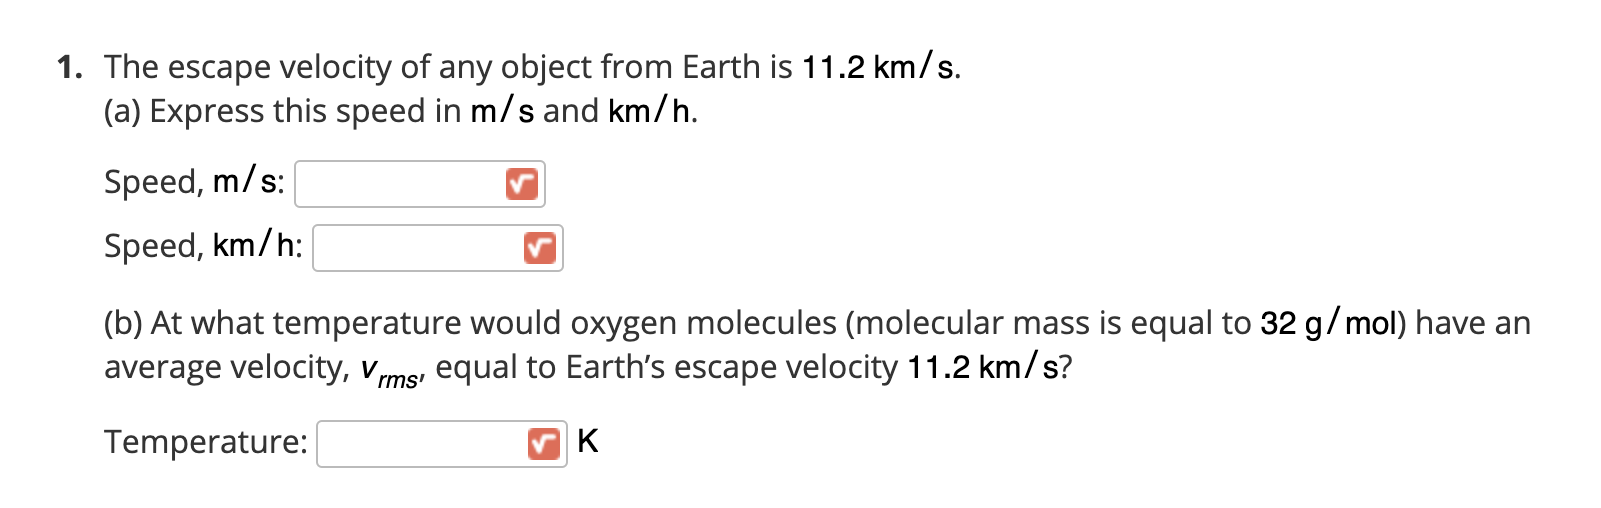 The escape velocity of any object from Earth is 11.2 km/s.
(a) Express this speed in m/s and km/h.
Speed, m/s:
Speed, km/h:
(b) At what temperature would oxygen molecules (molecular mass is equal to 32 g/mol) have an
average velocity, vms, equal to Earth's escape velocity 11.2 km/s?
